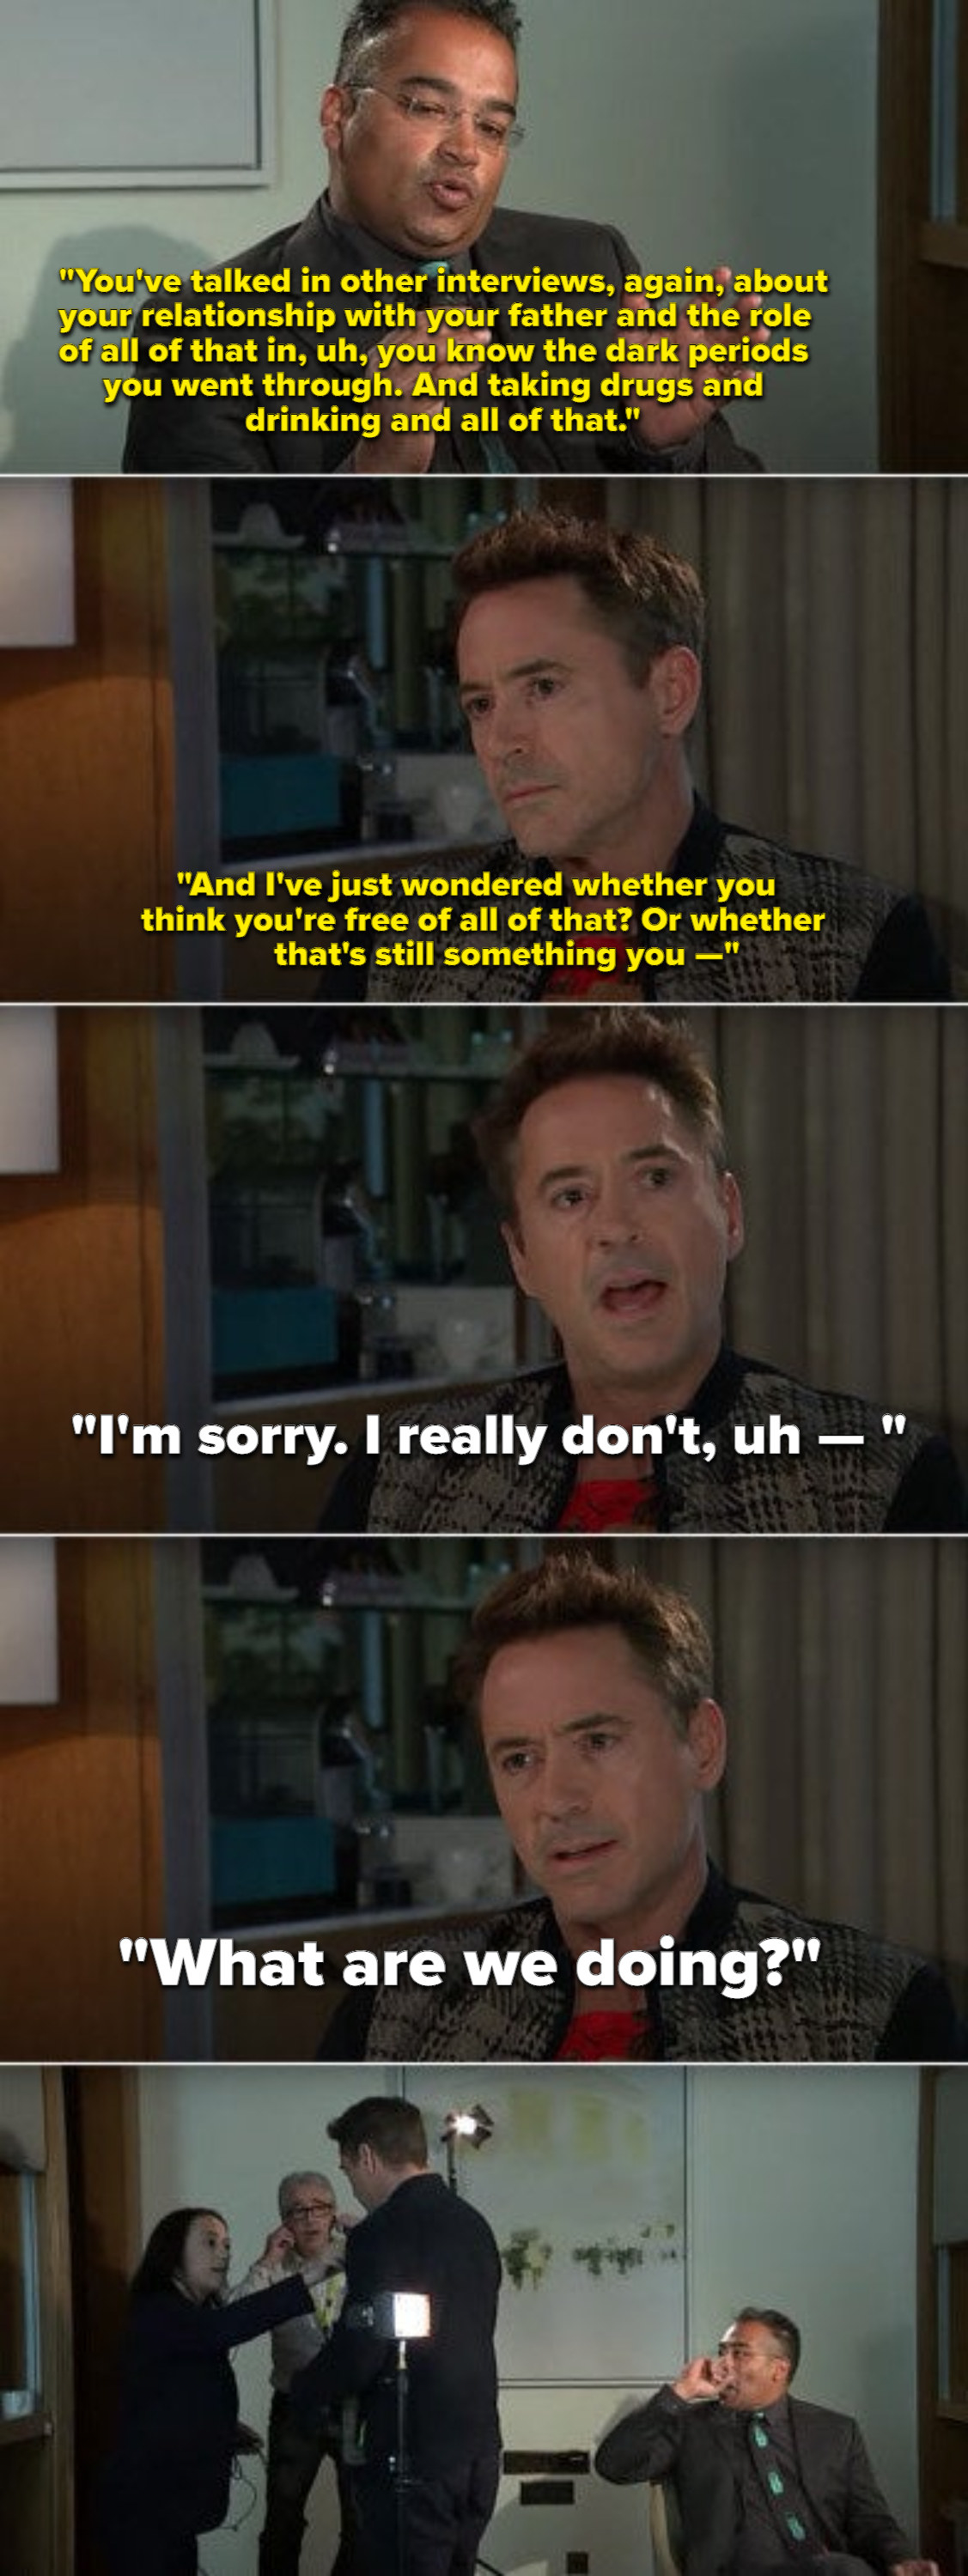 Robert Downey Jr. leaving an interview after being asked about his addiction and relationship with his father